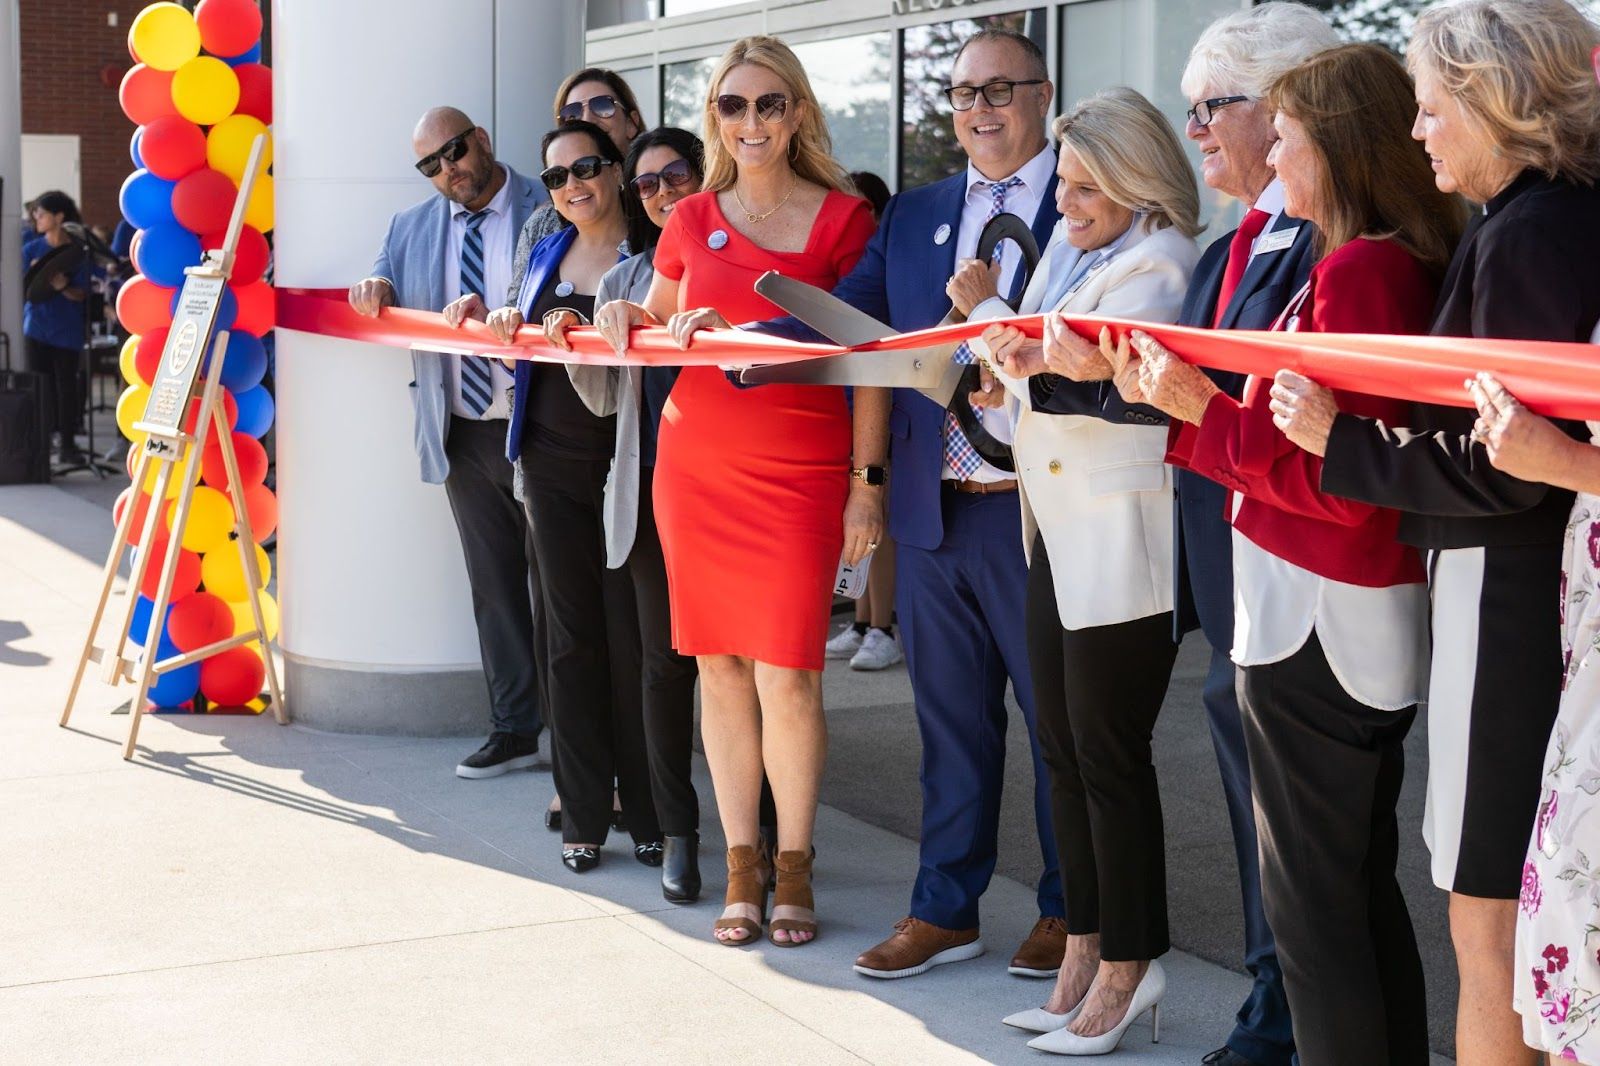 Los Al USD Board of Education President Diana Hill cuts the ribbon at a ceremony marking the opening of the new STEM building at LAHS. On her right is Supt. Andrew Pulver and to his right is Deputy Supt. Ondrea Reed along with other district administrators. To Hill's left is Board Vice President Chris Forehan, board member Megan Cutuli and board member Marlys Davidson. Photo by Andrew Ficke.